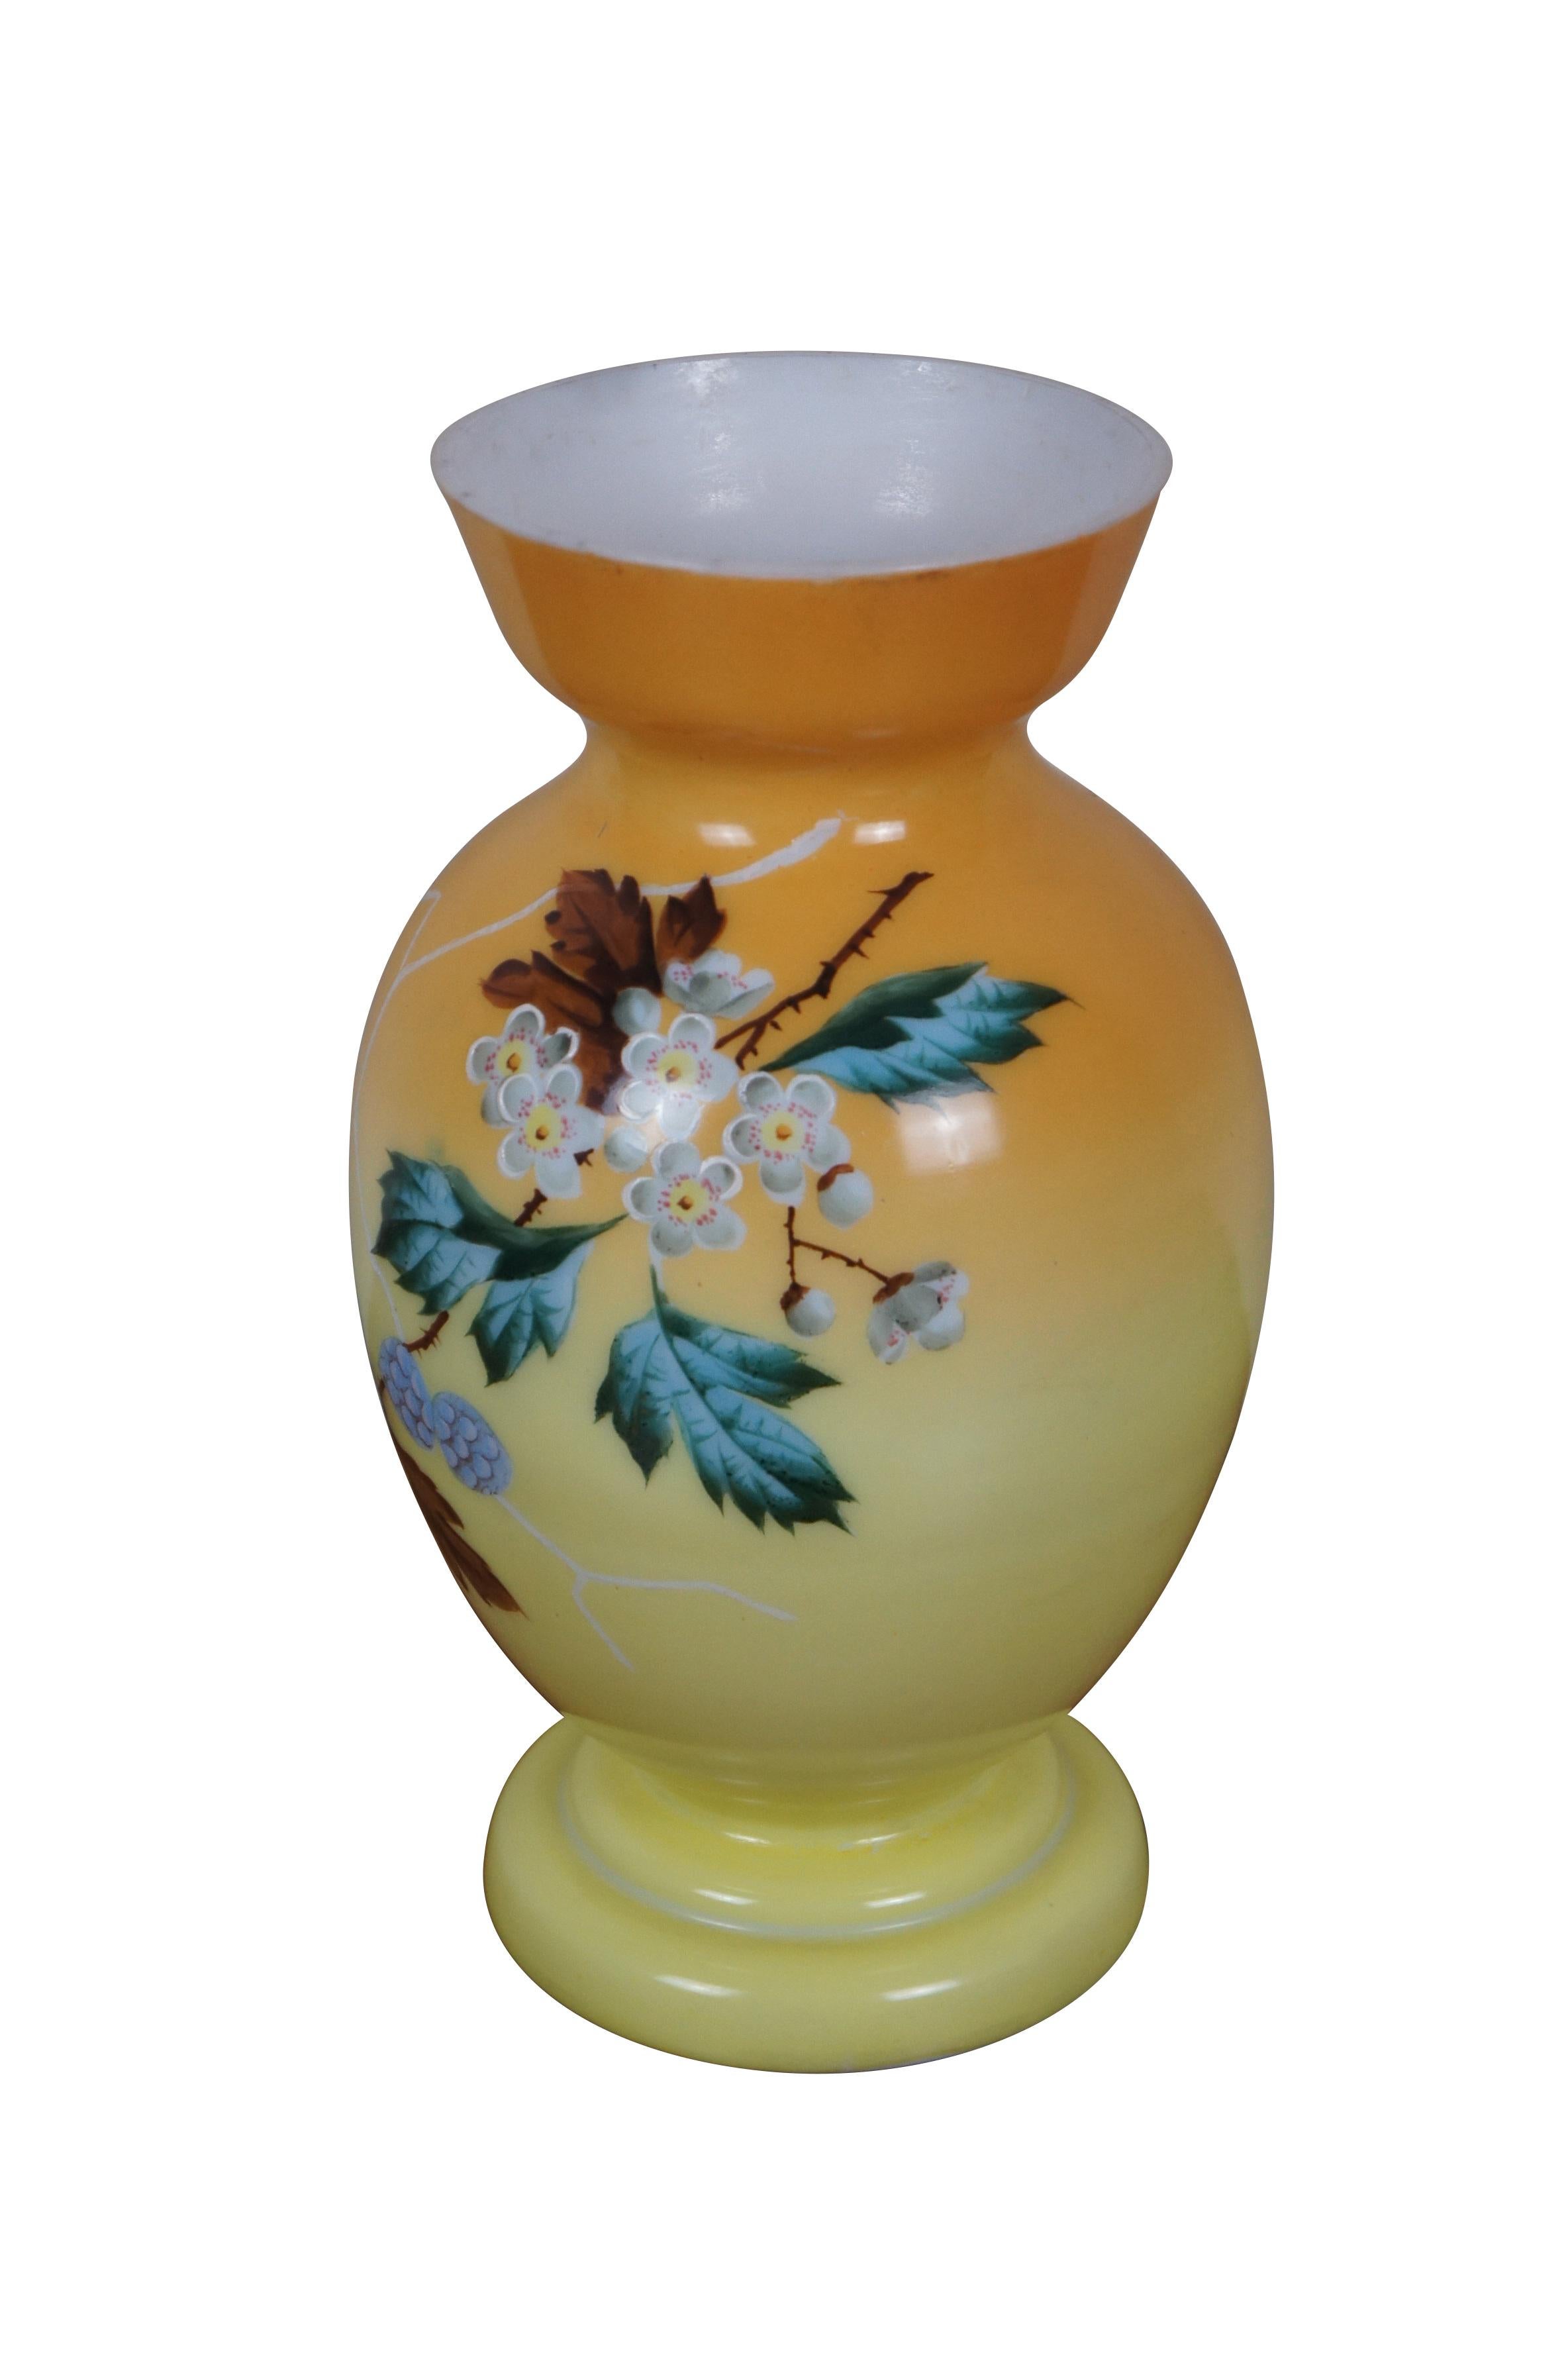 Vintage opaline / painted milk glass vase. Yellow and orange ombre with a hand painted design of crossed branches of cherry blossoms and pine cones. Marked 4 on base.

Dimensions:
6.5